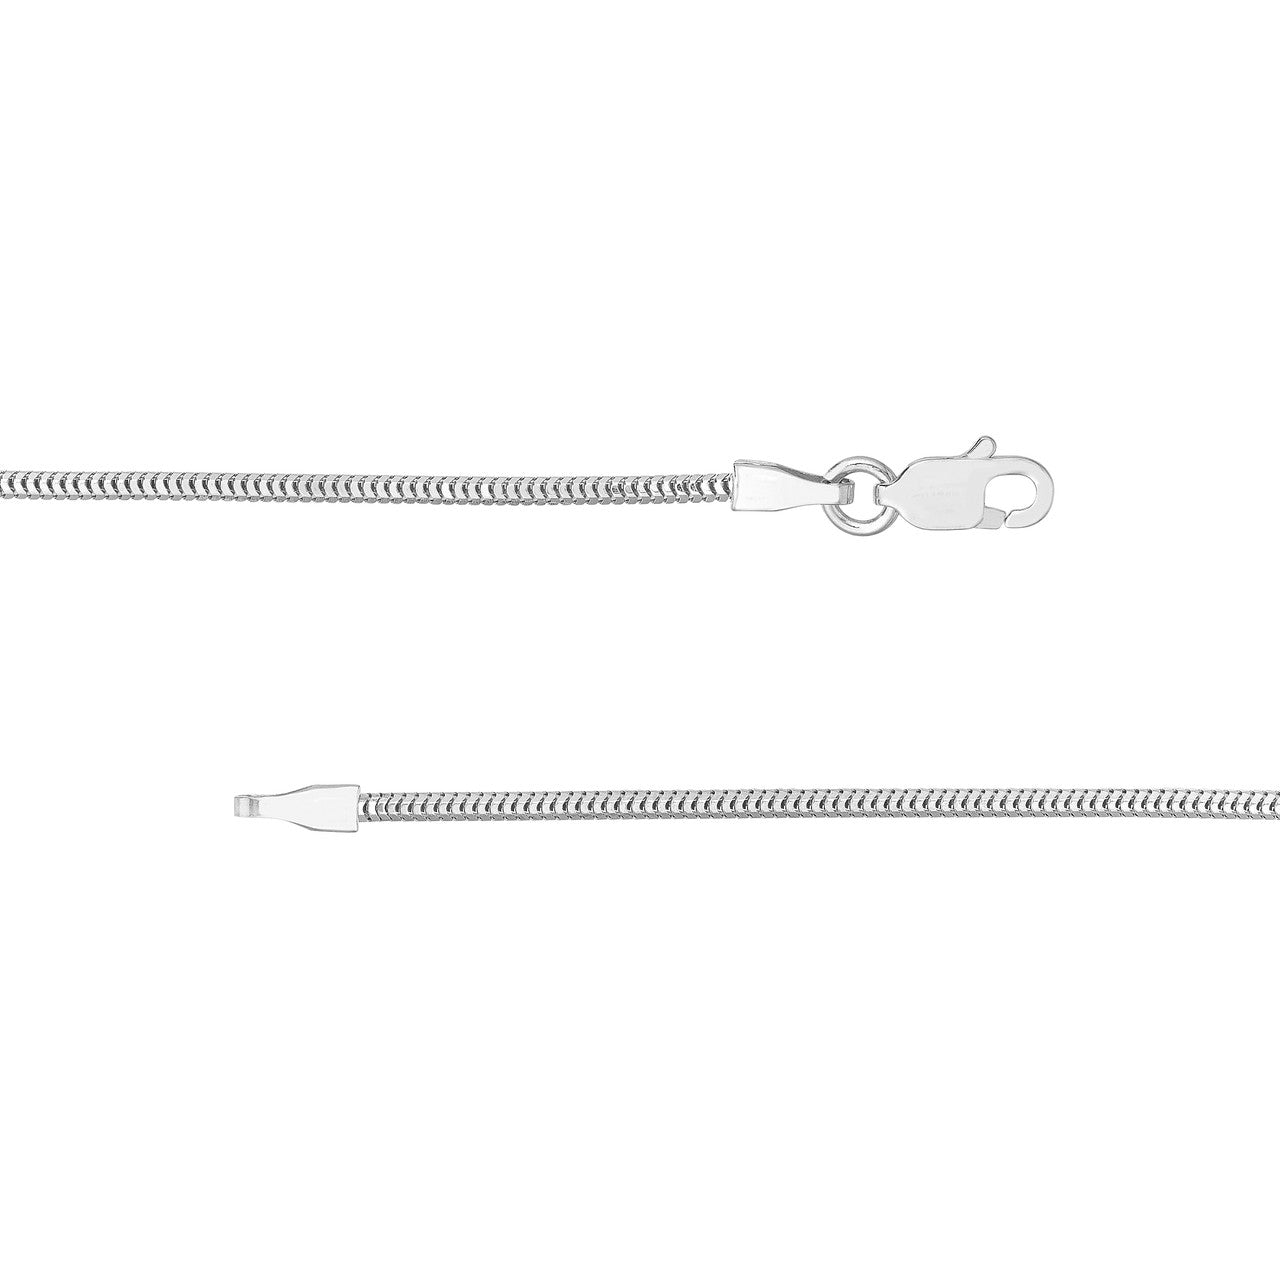 14K Yellow Gold 1.4mm Snake Chain with Lobster Lock